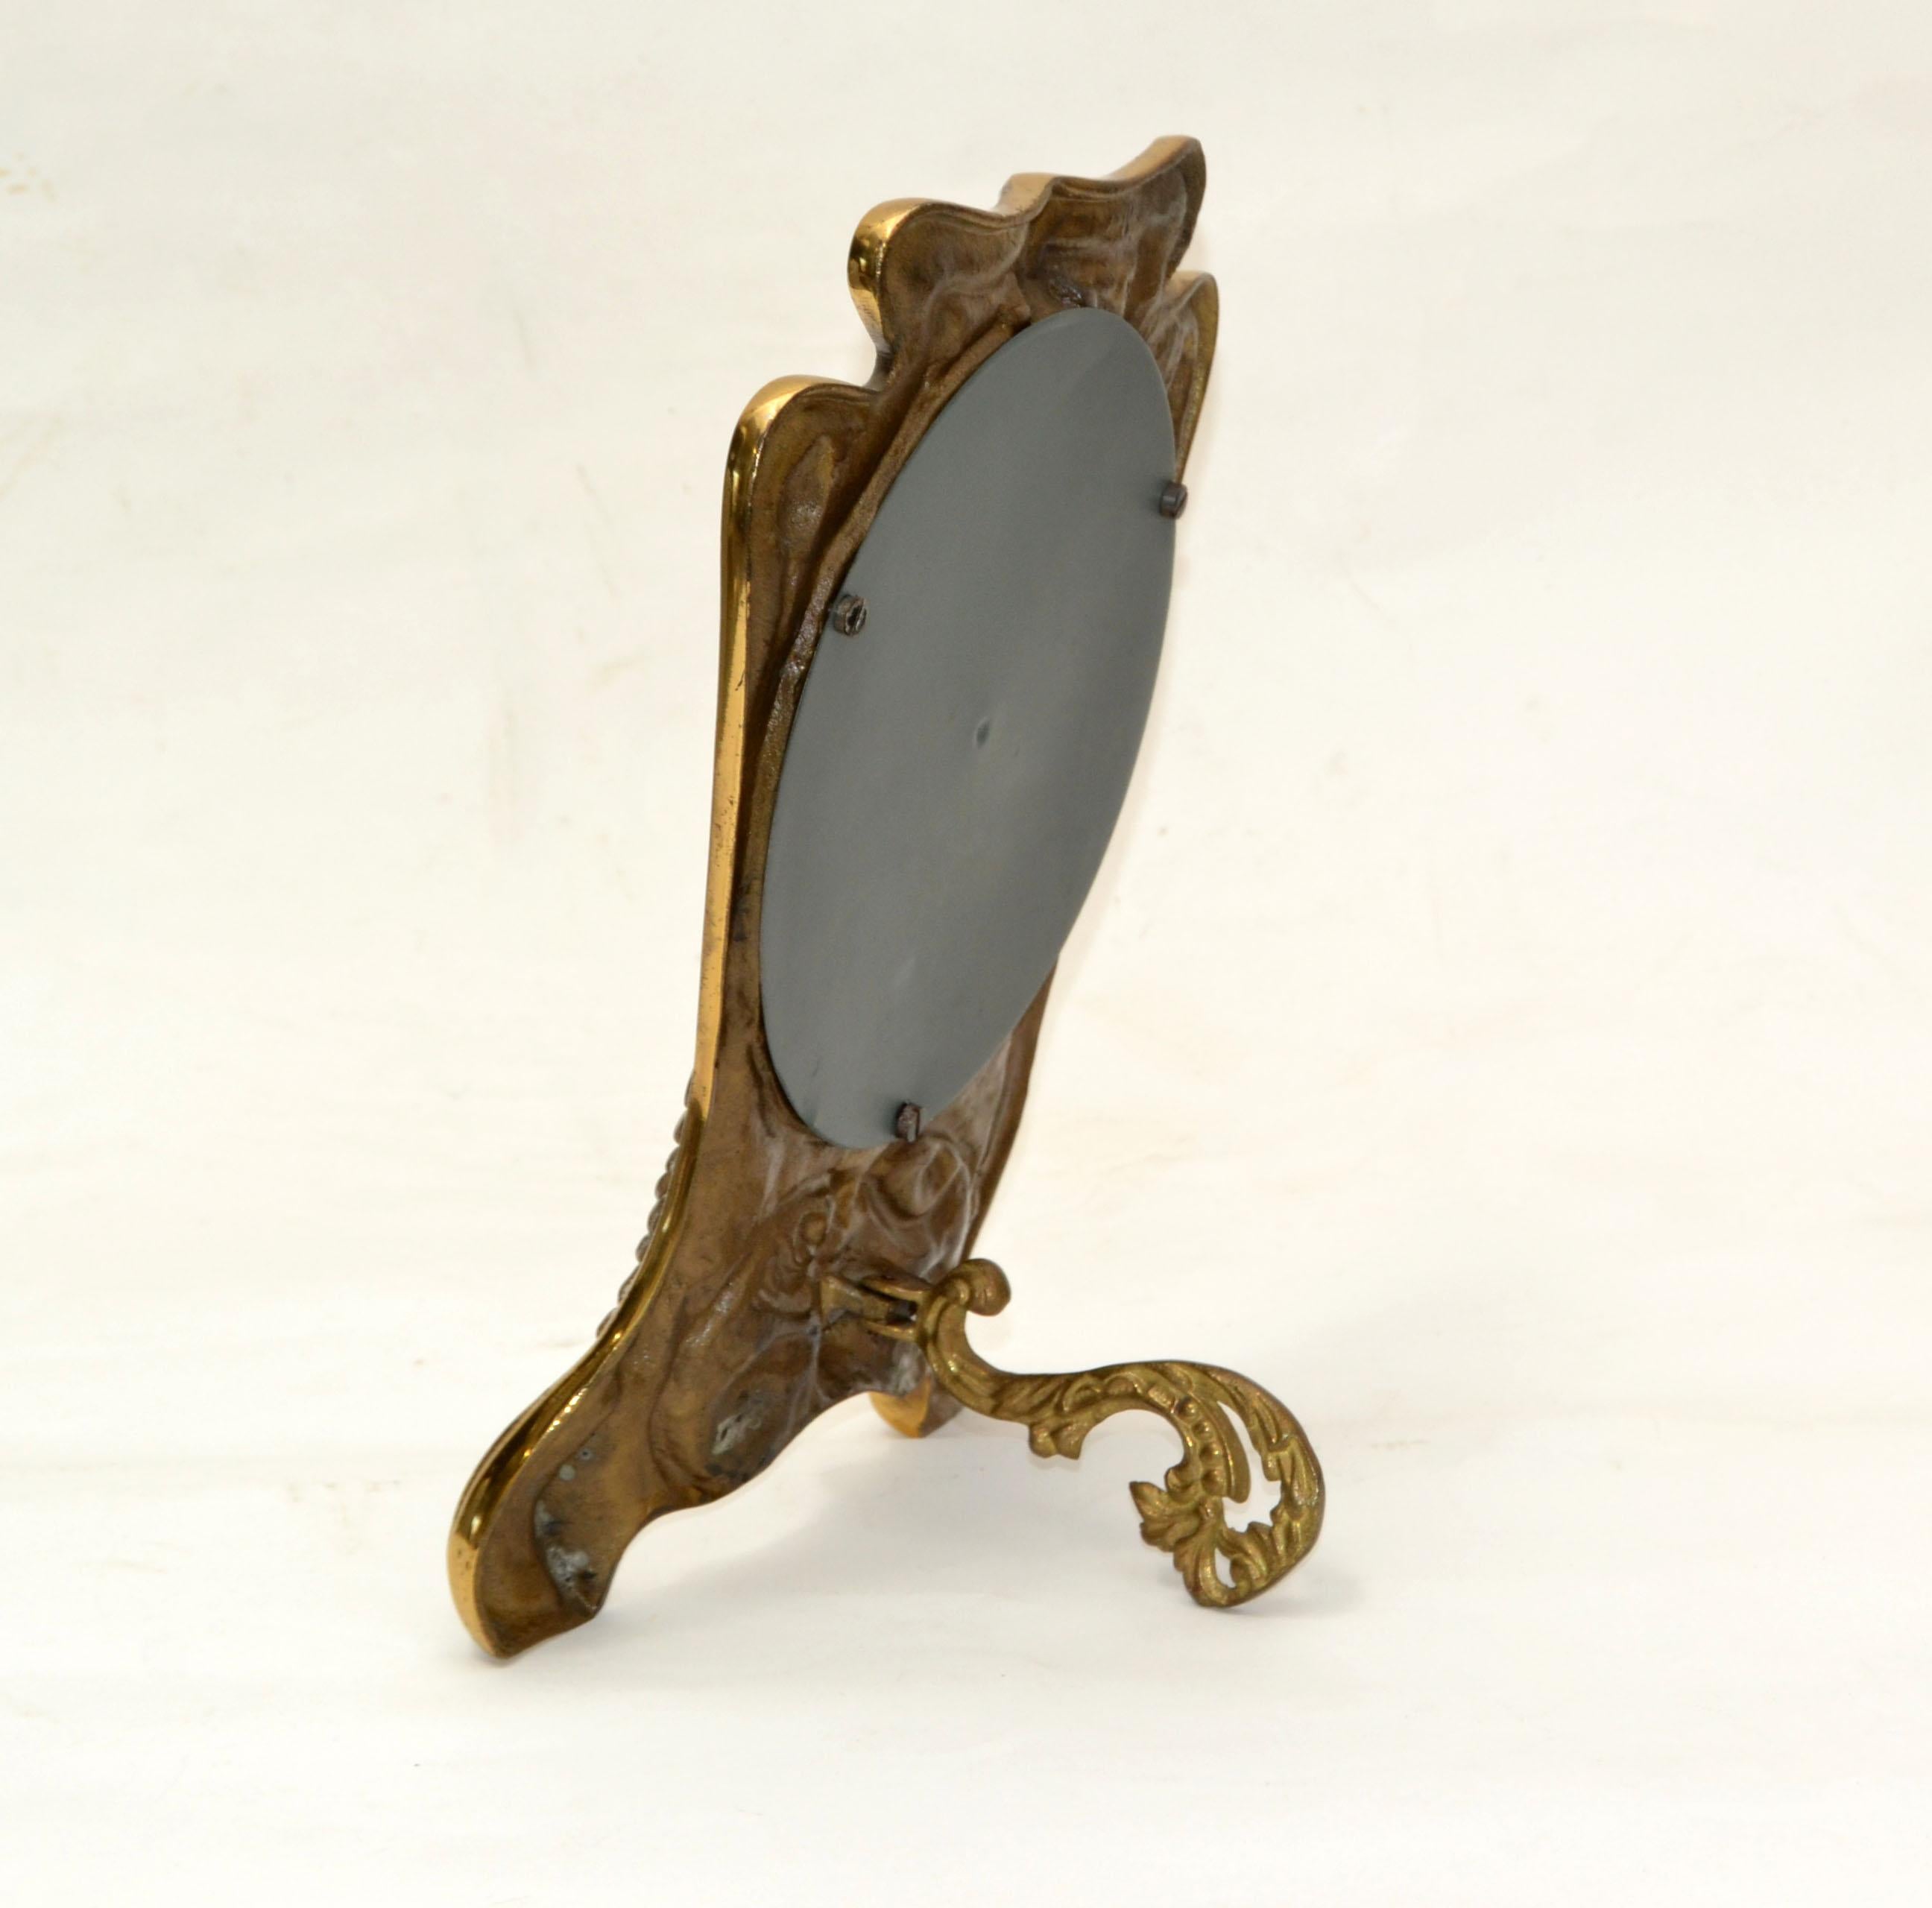 Cast Art Nouveau Whimsical Handcrafted Golden Bronze Table Mirror Vanity Mirror 1940 For Sale